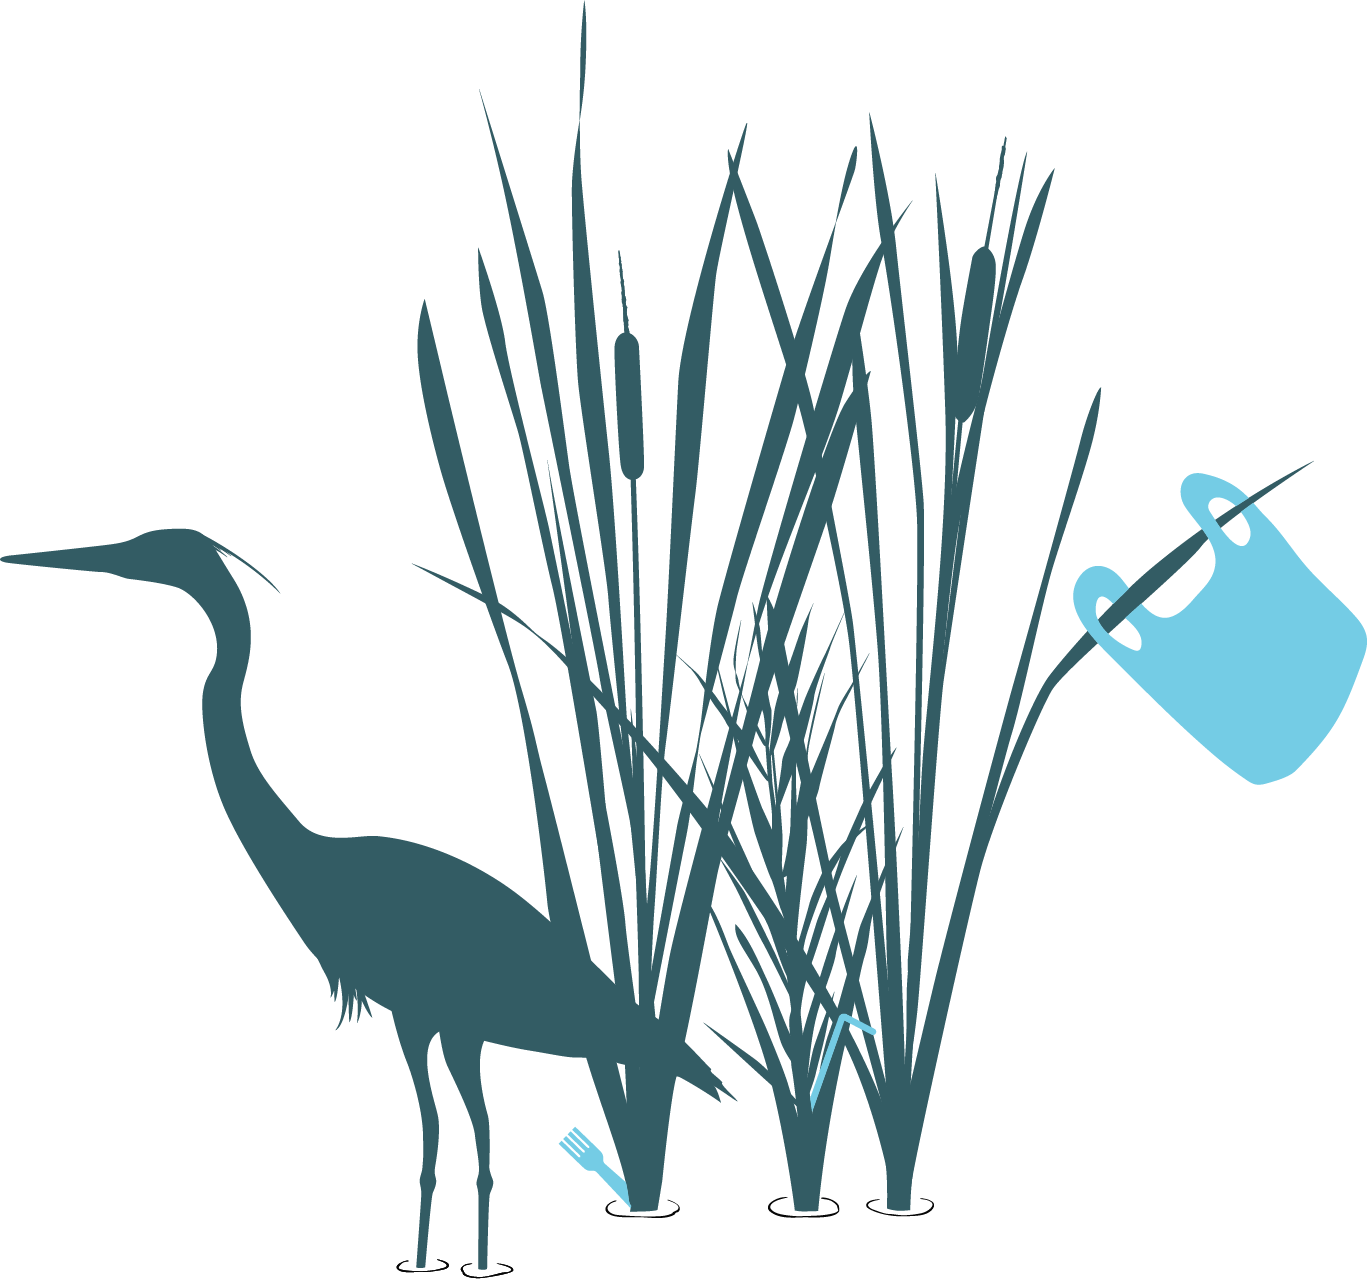 Illustration of a heron standing in water and grass with plastic waste integrated into the surroundings